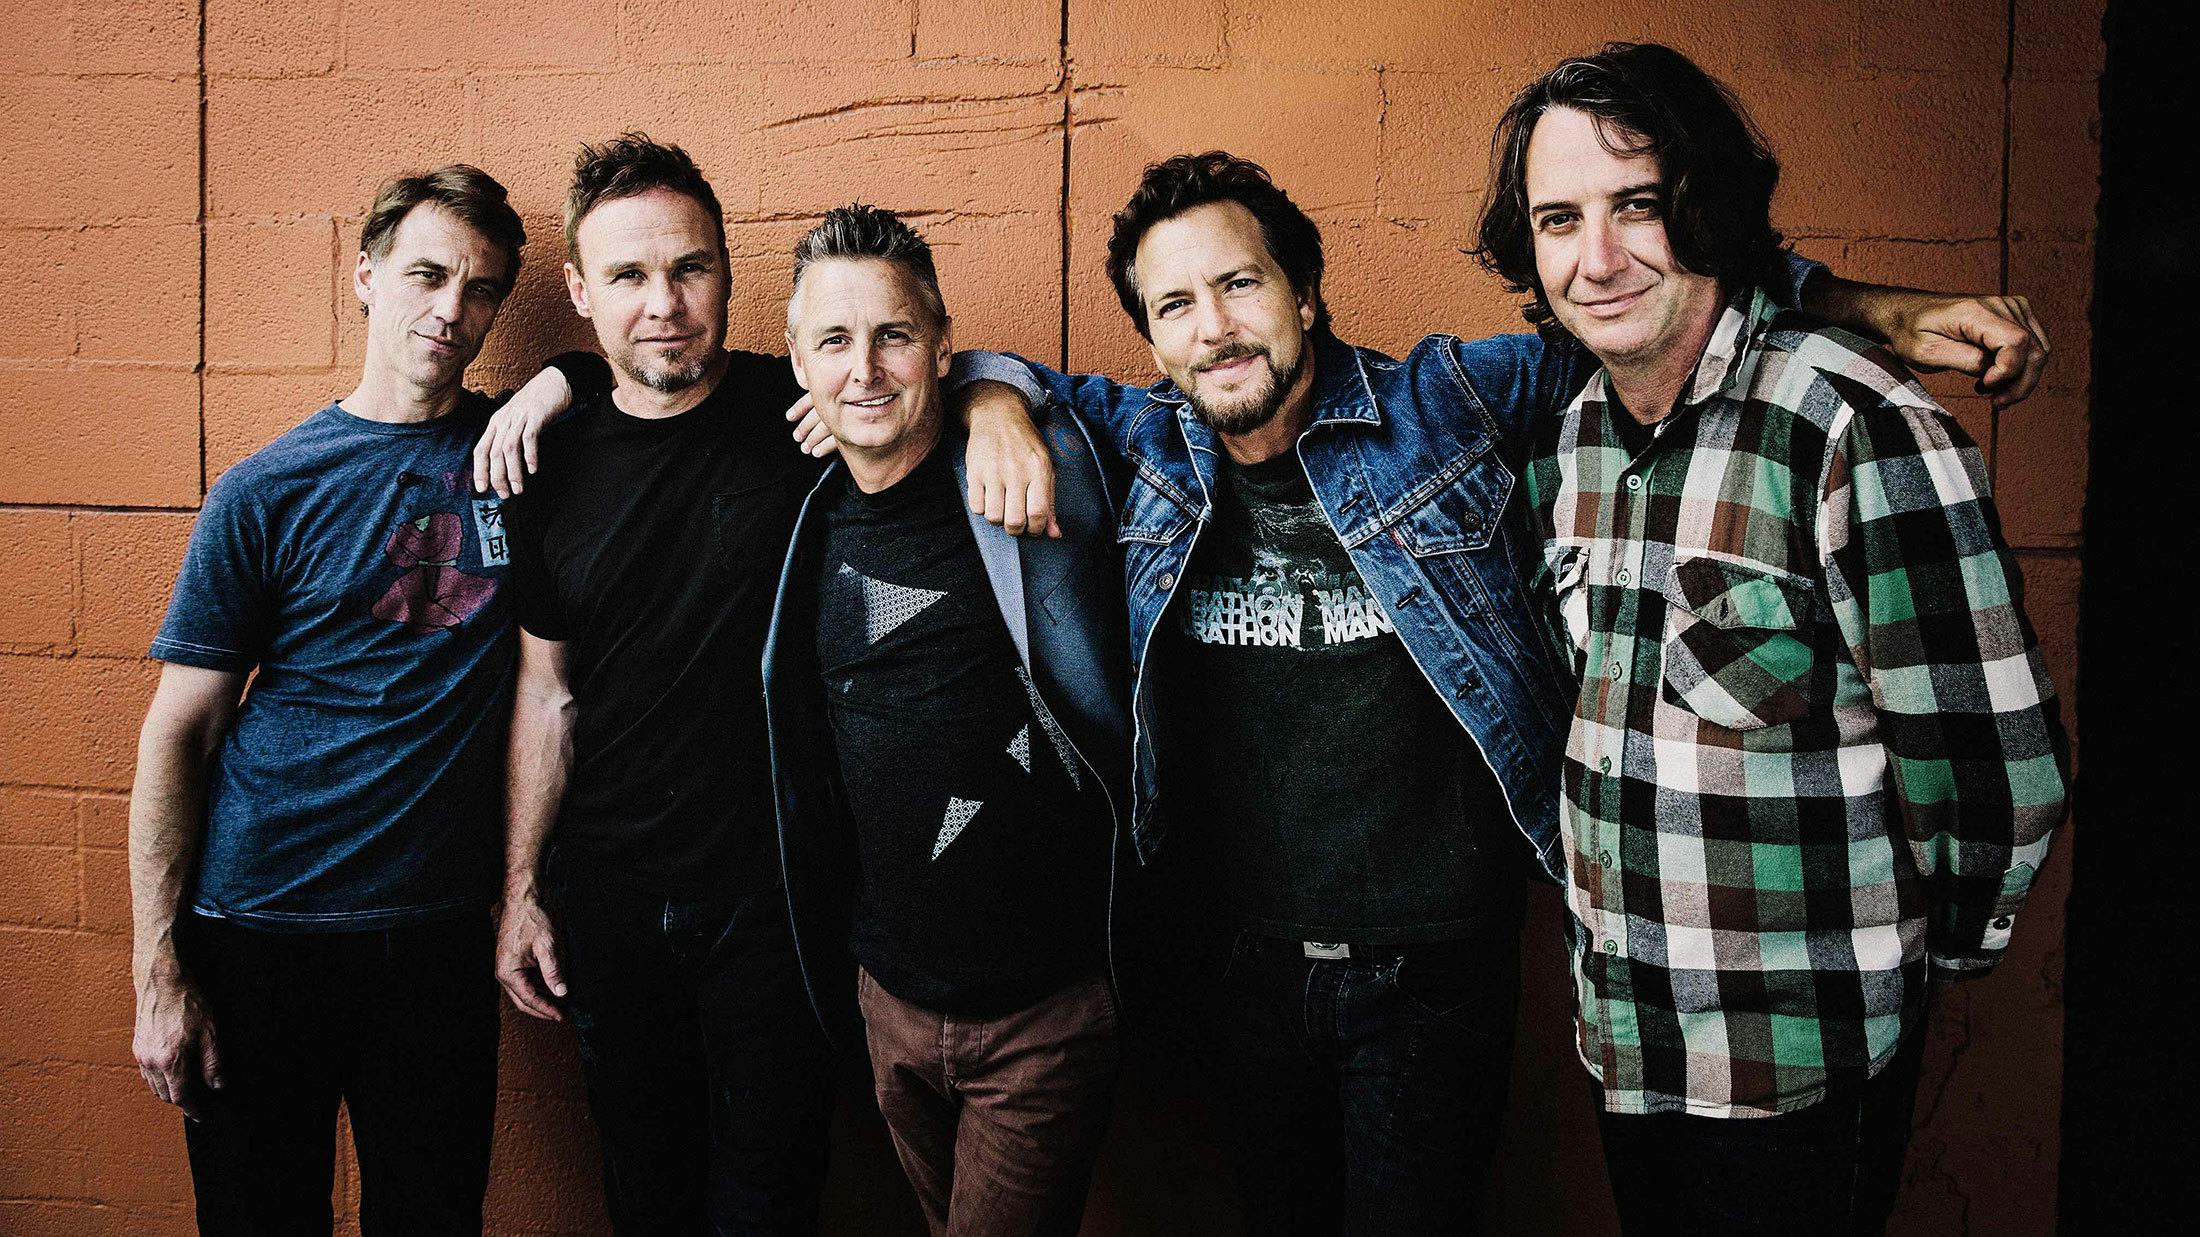 Listen To Pearl Jam's New Single, Dance Of The Clairvoyants